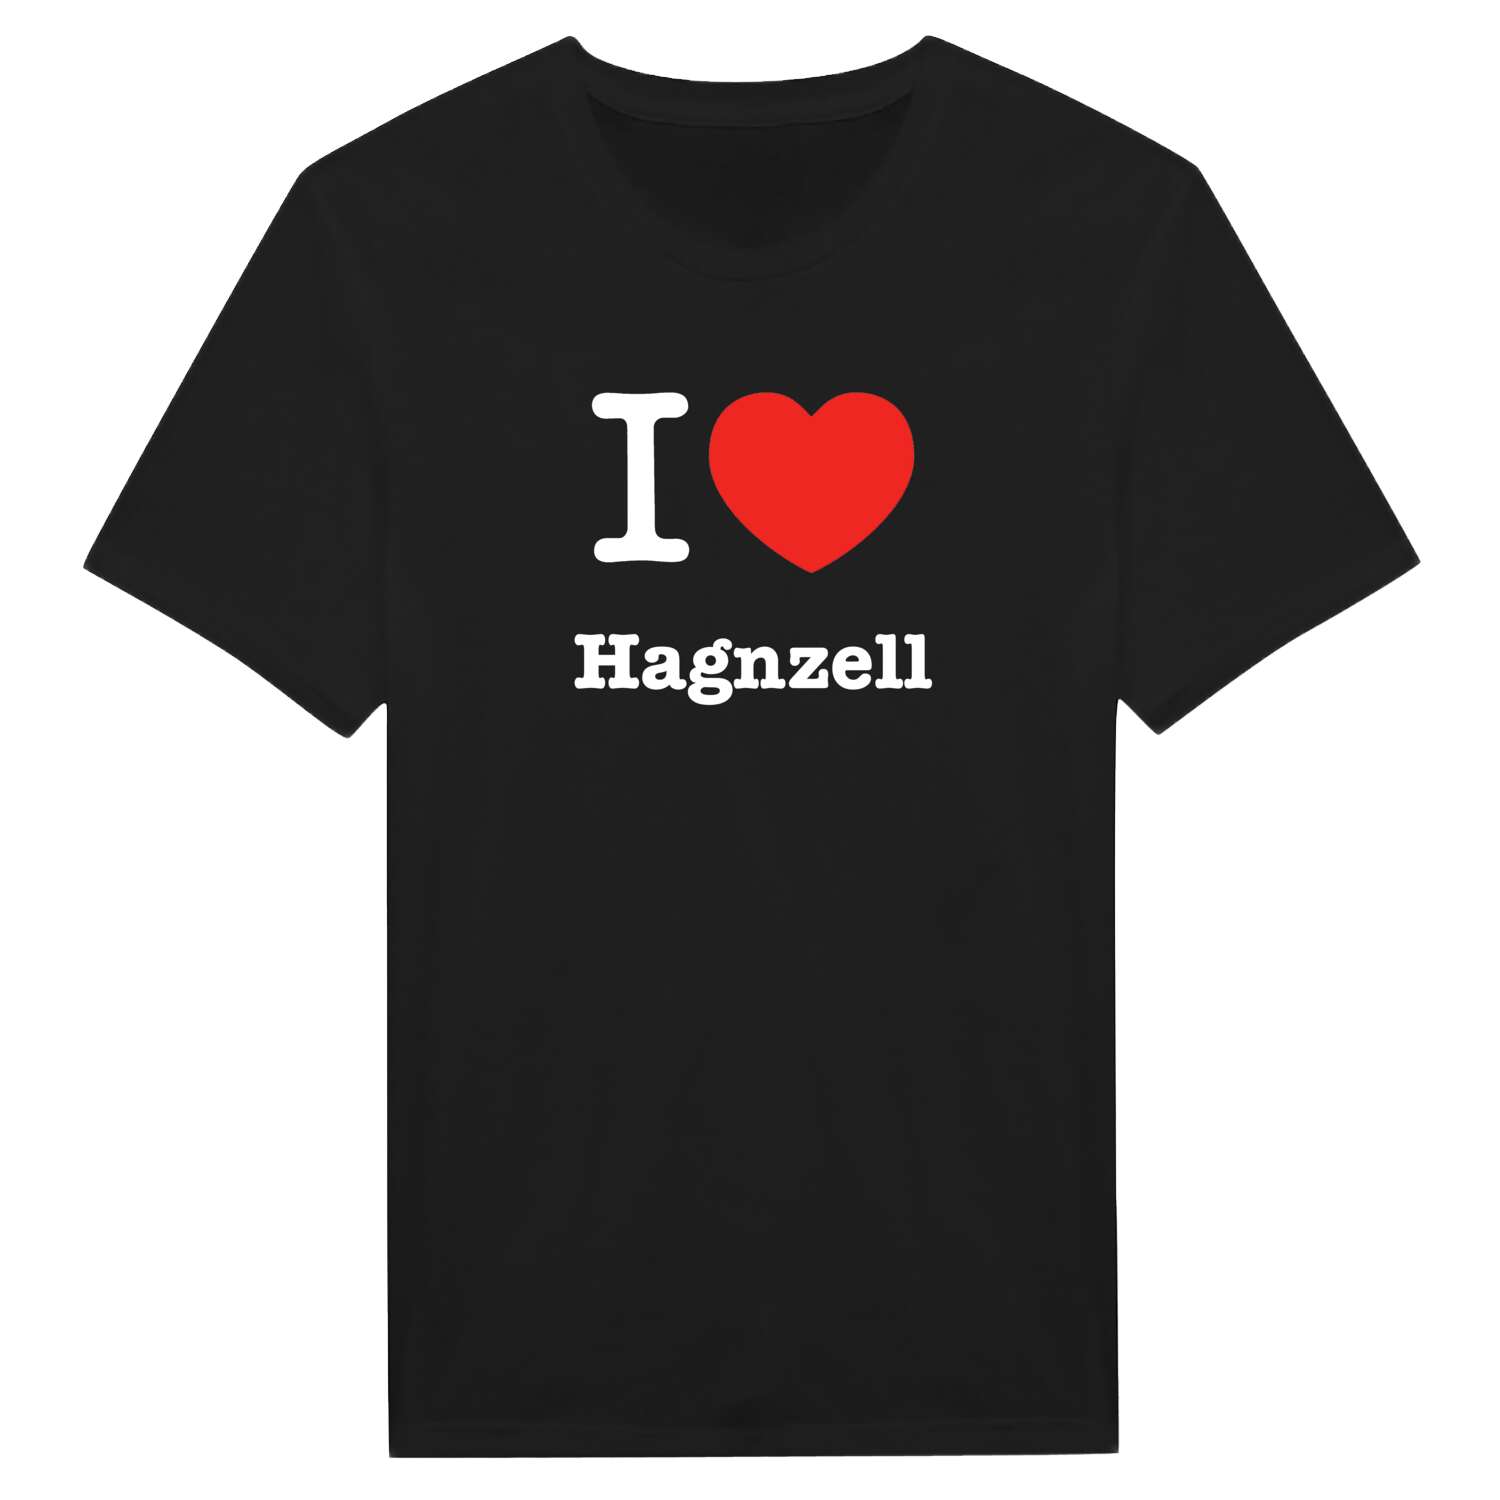 Hagnzell T-Shirt »I love«